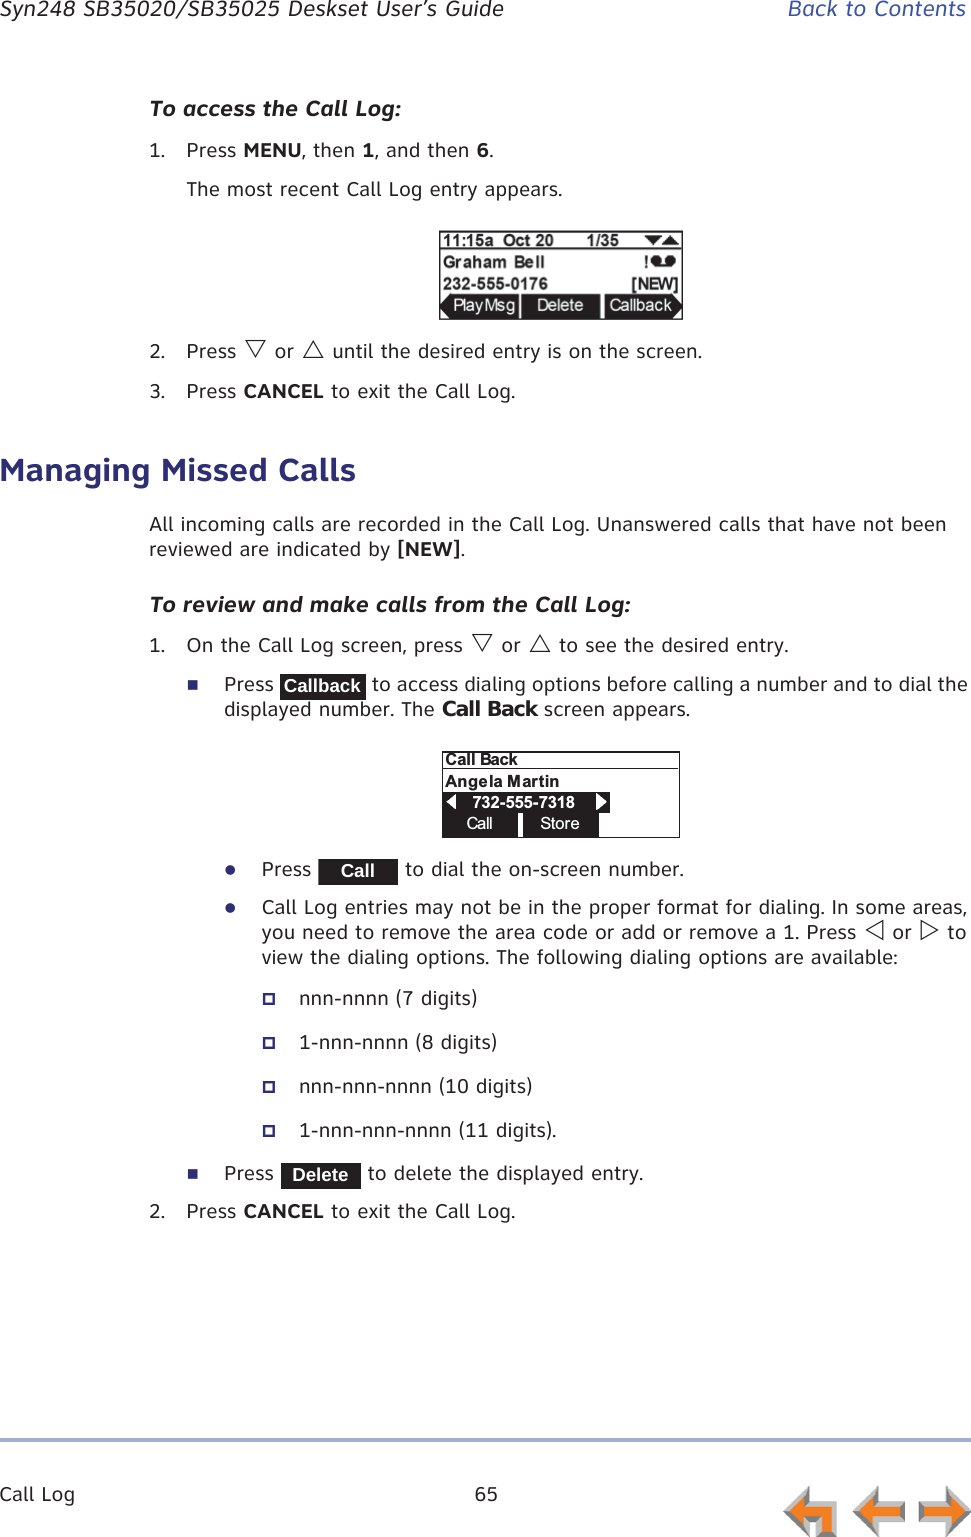 Call Log 65      Syn248 SB35020/SB35025 Deskset User’s Guide Back to ContentsTo access the Call Log:1. Press MENU, then 1, and then 6.The most recent Call Log entry appears.2. Press V or U until the desired entry is on the screen.3. Press CANCEL to exit the Call Log.Managing Missed CallsAll incoming calls are recorded in the Call Log. Unanswered calls that have not been reviewed are indicated by [NEW].To review and make calls from the Call Log:1. On the Call Log screen, press V or U to see the desired entry.Press   to access dialing options before calling a number and to dial the displayed number. The Call Back screen appears.zPress   to dial the on-screen number.zCall Log entries may not be in the proper format for dialing. In some areas, you need to remove the area code or add or remove a 1. Press Y or Z to view the dialing options. The following dialing options are available:nnn-nnnn (7 digits)1-nnn-nnnn (8 digits)nnn-nnn-nnnn (10 digits)1-nnn-nnn-nnnn (11 digits).Press   to delete the displayed entry.2. Press CANCEL to exit the Call Log.CallbackCall StoreCall BackAngela Martin            732-555-7318                    CallDelete